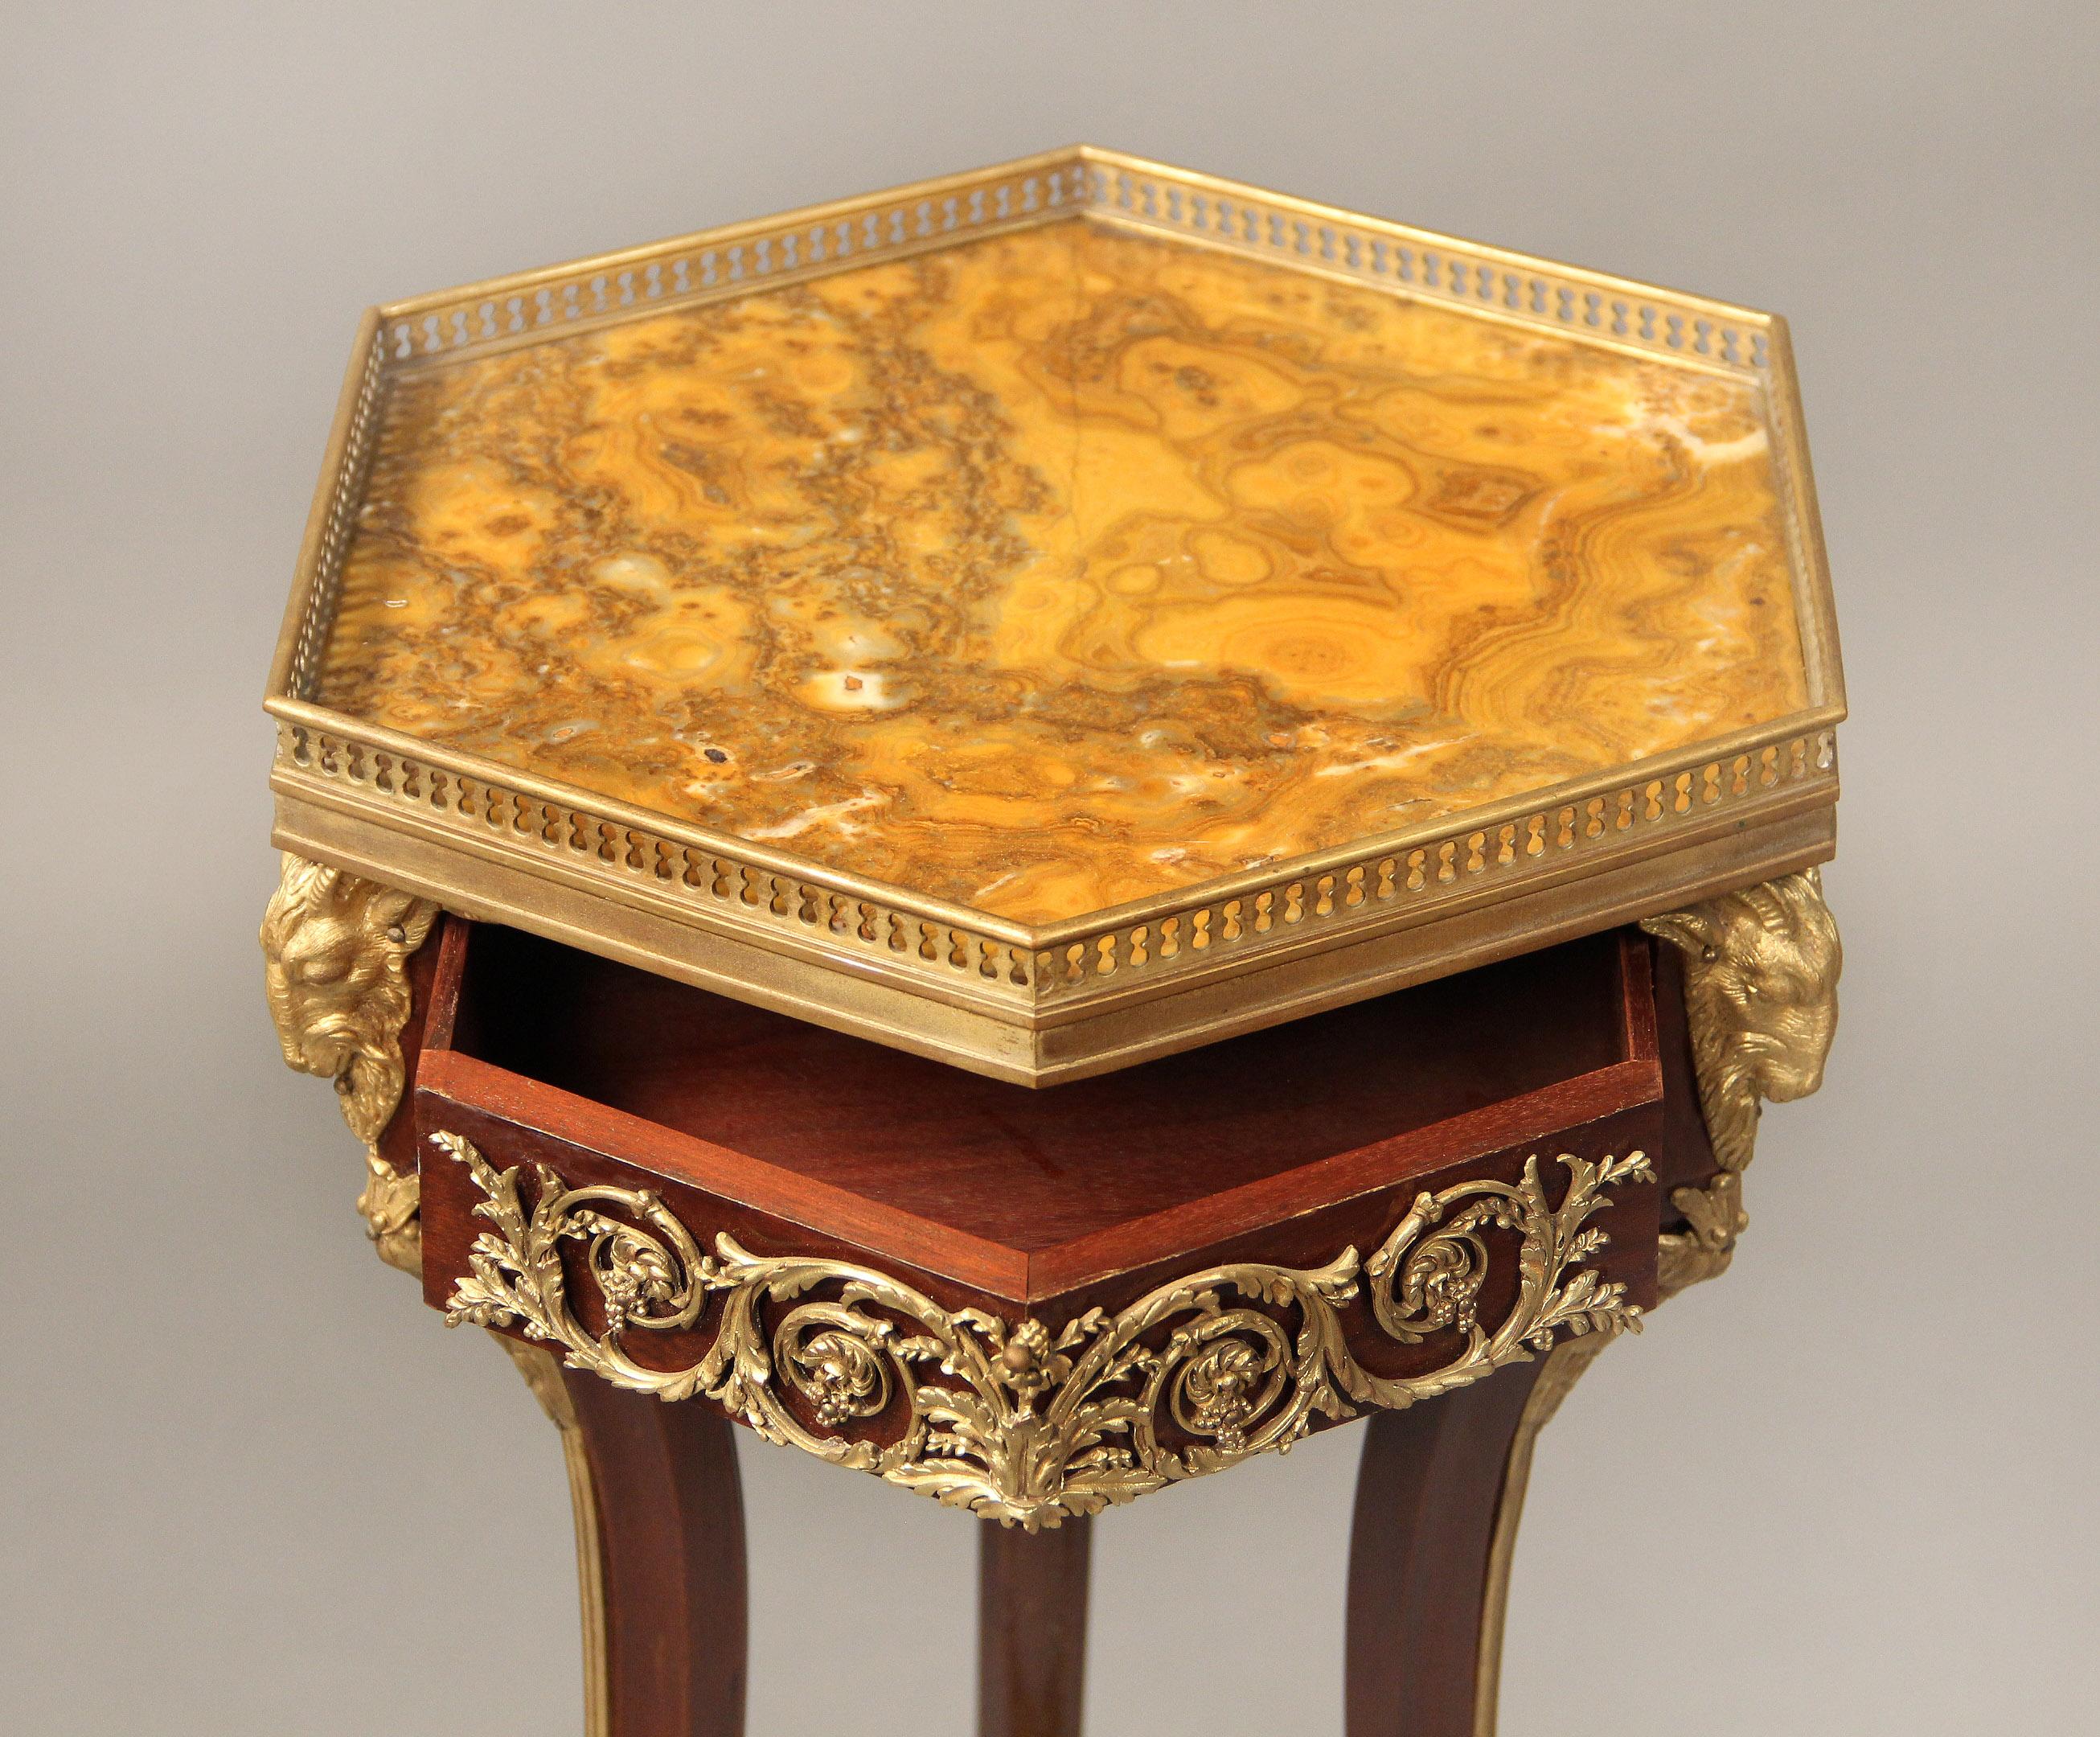 Late 19th century gilt bronze mounted Empire style side table

The hexagonal marble top within a bronze gallery above a single drawer surrounded by scrolling foliage and ram heads, three legs run down to a marble stretcher and standing on bronze